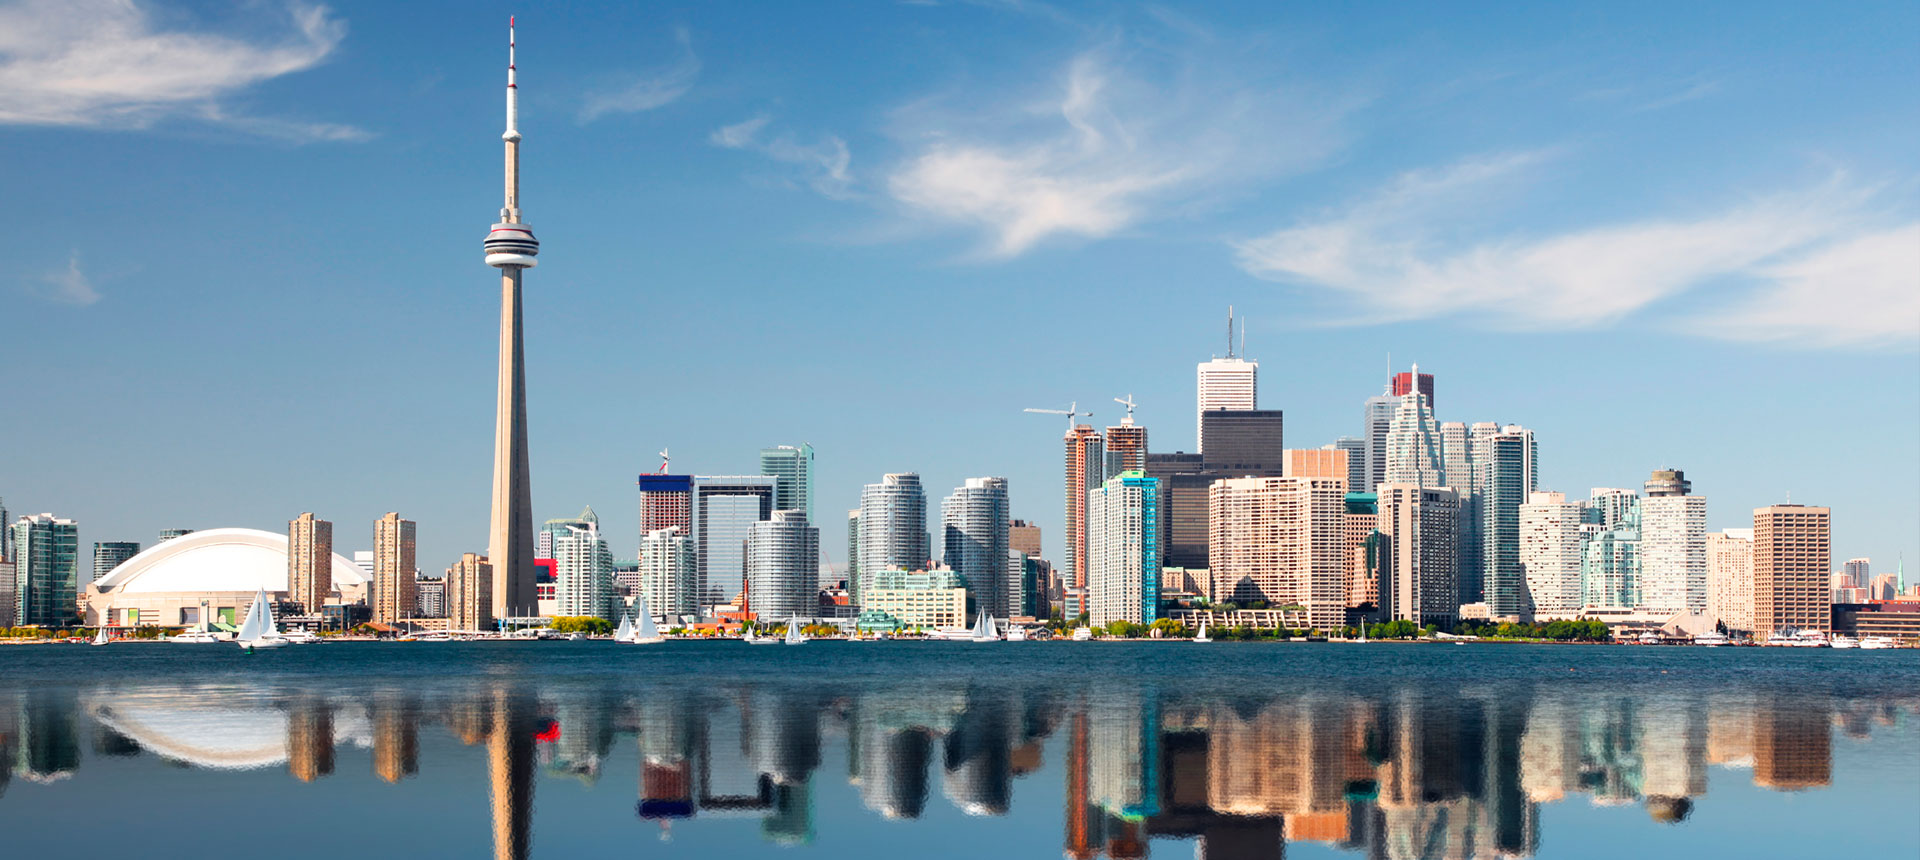 Toronto Backgrounds on Wallpapers Vista